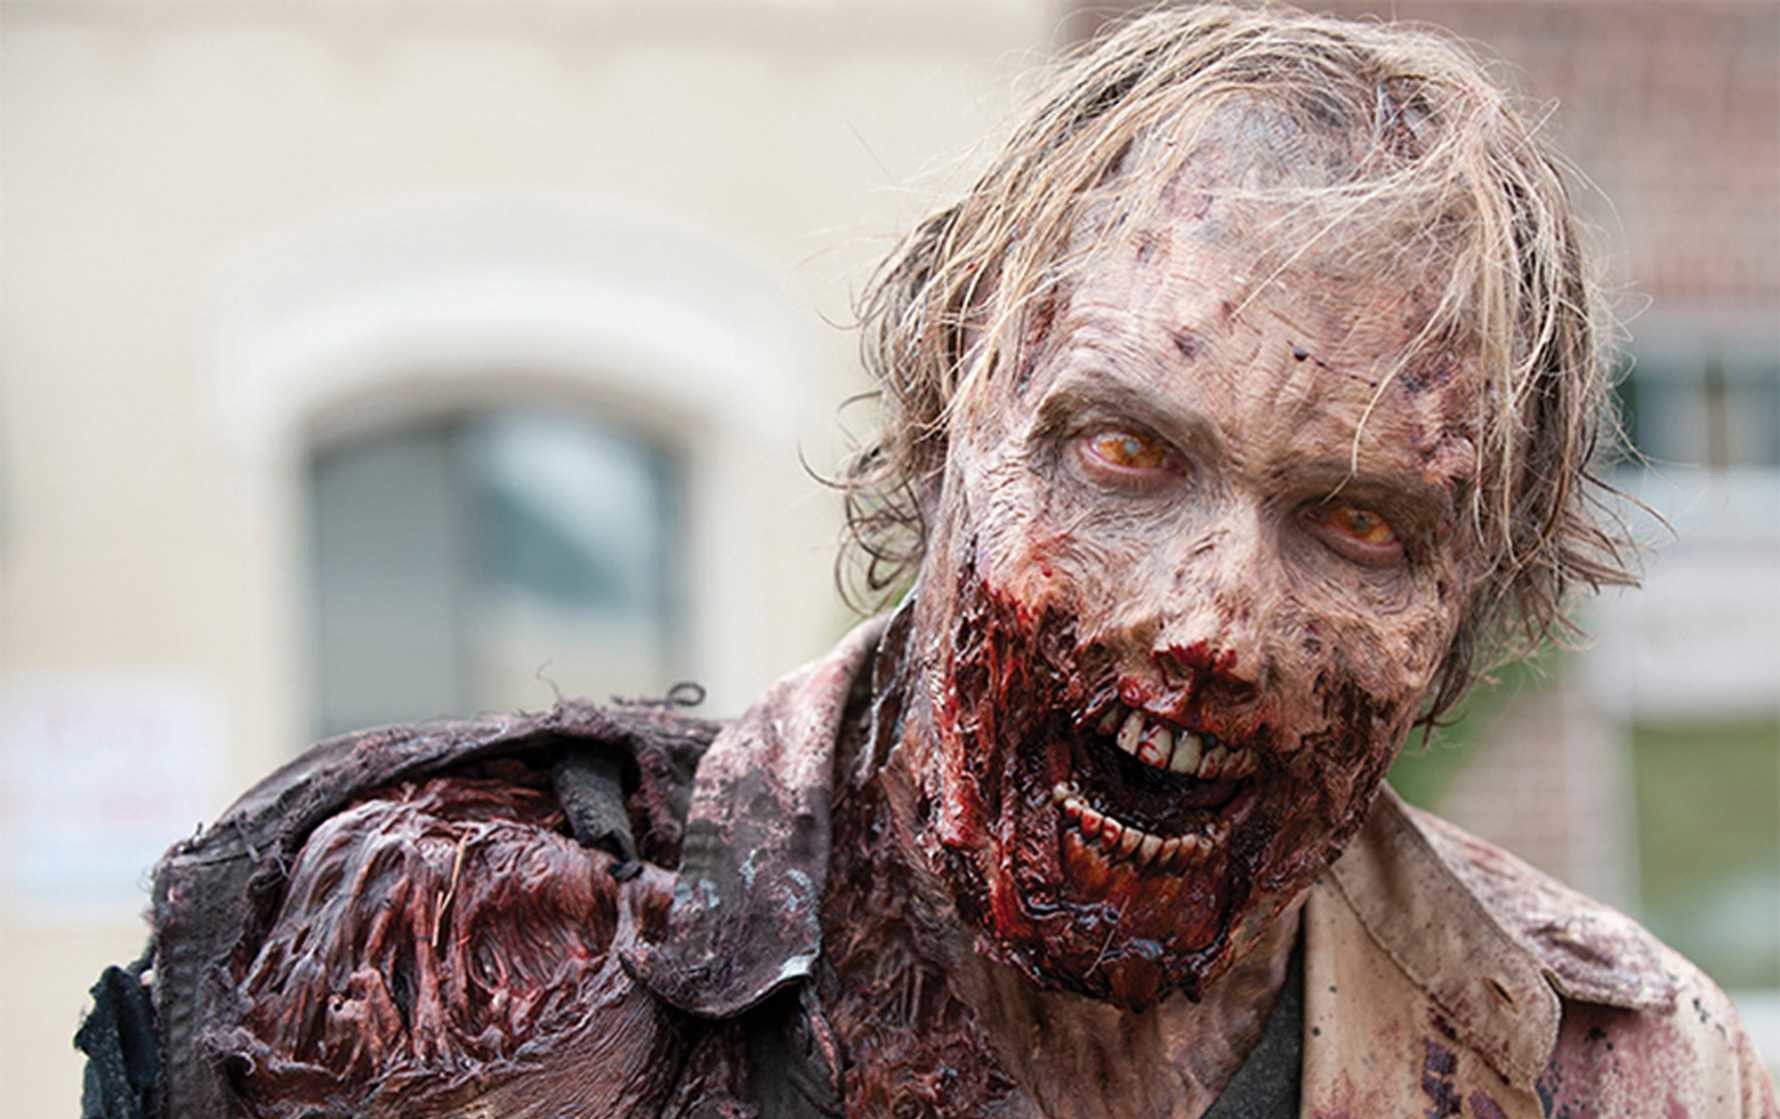 The Walking Dead Zombie close-up 2